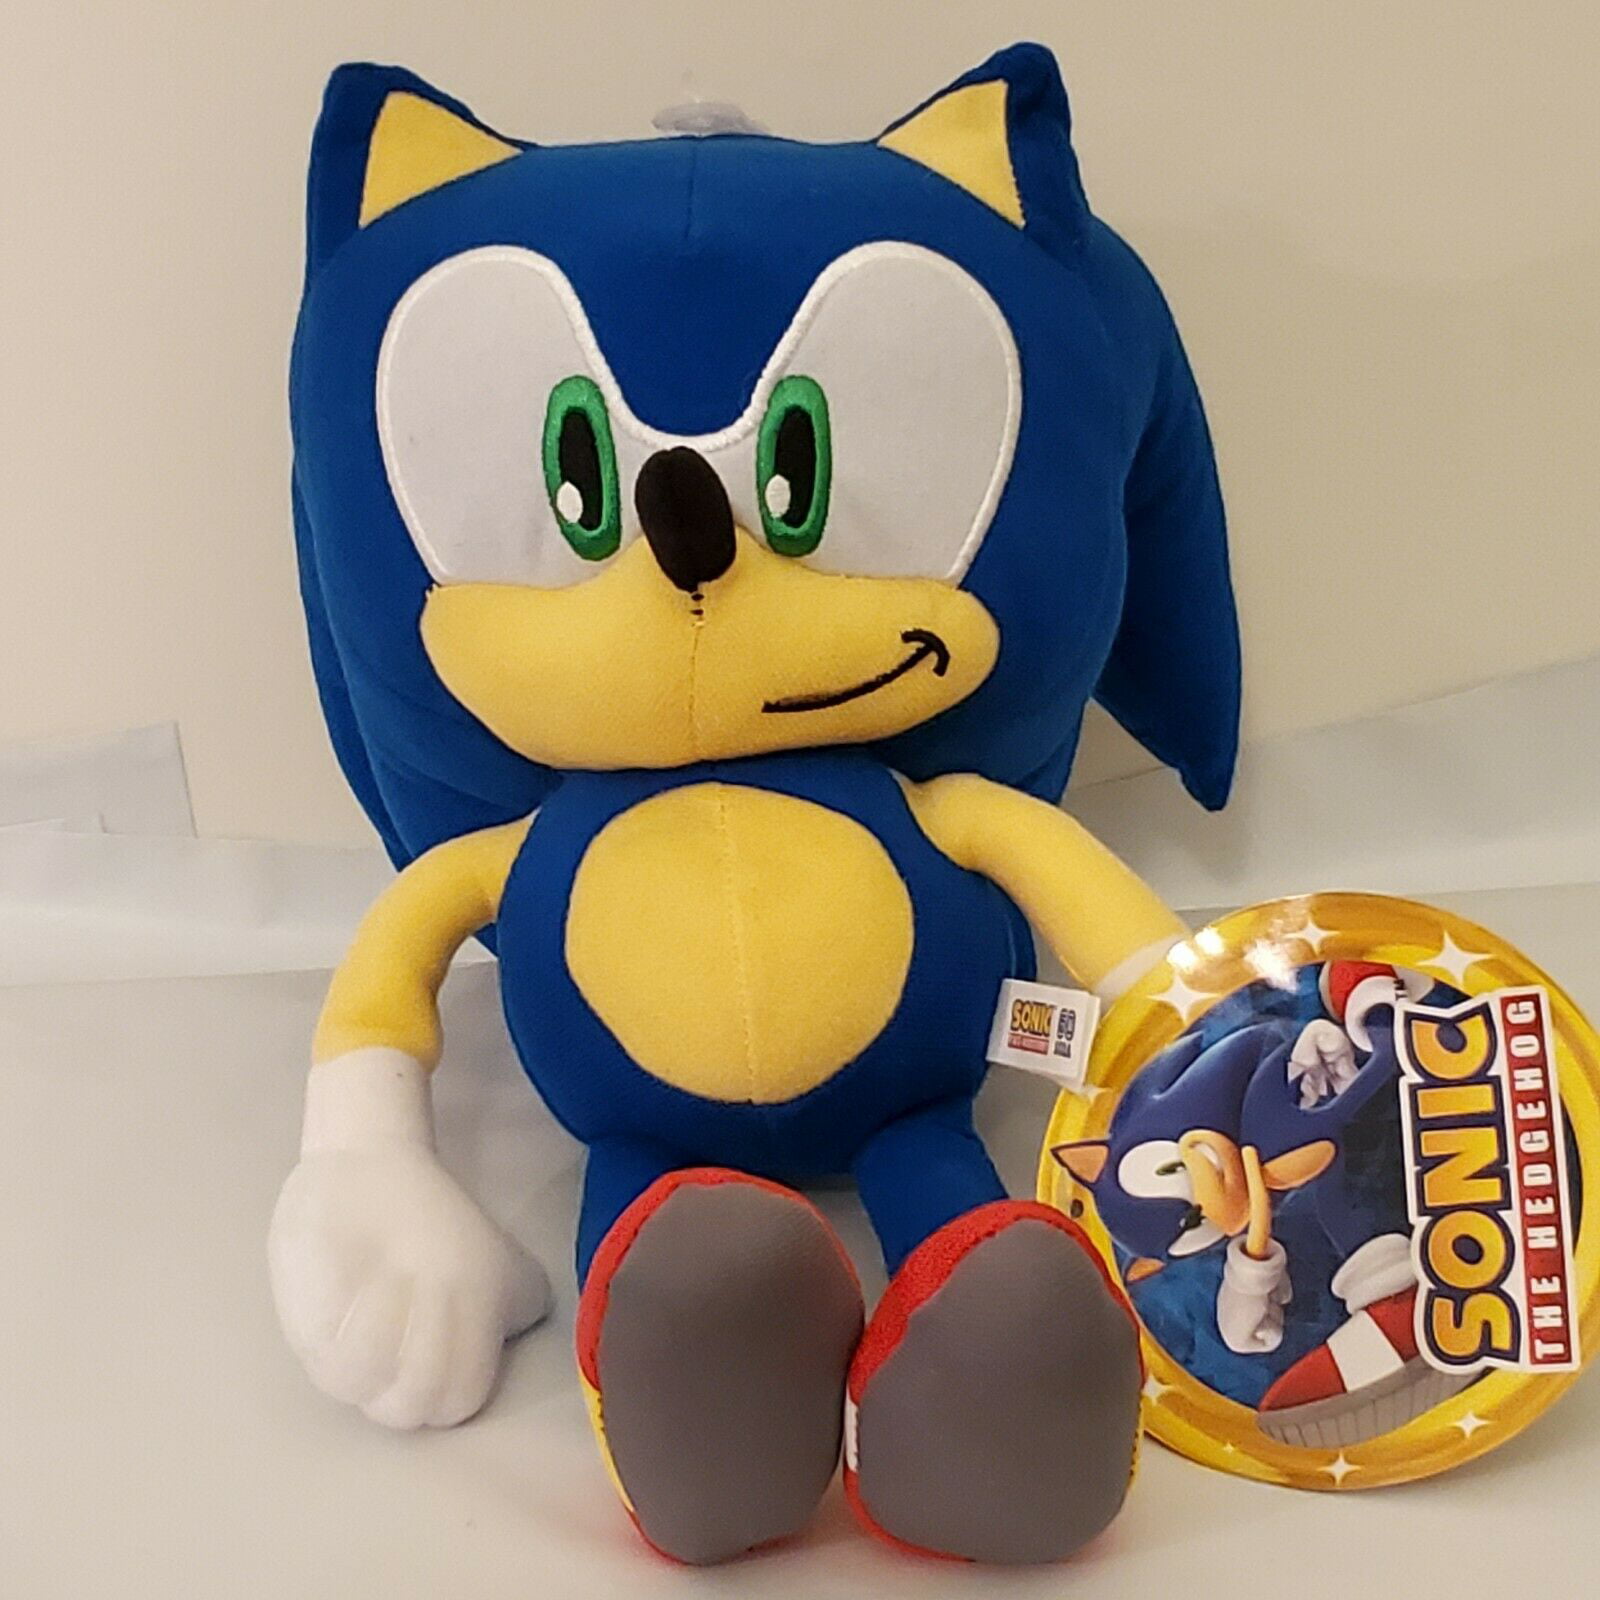 NEW OFFICIAL SEGA SONIC THE HEDGEHOG SOFT PLUSH TOYS KNUCKLES SHADOW TAILS SONIC 